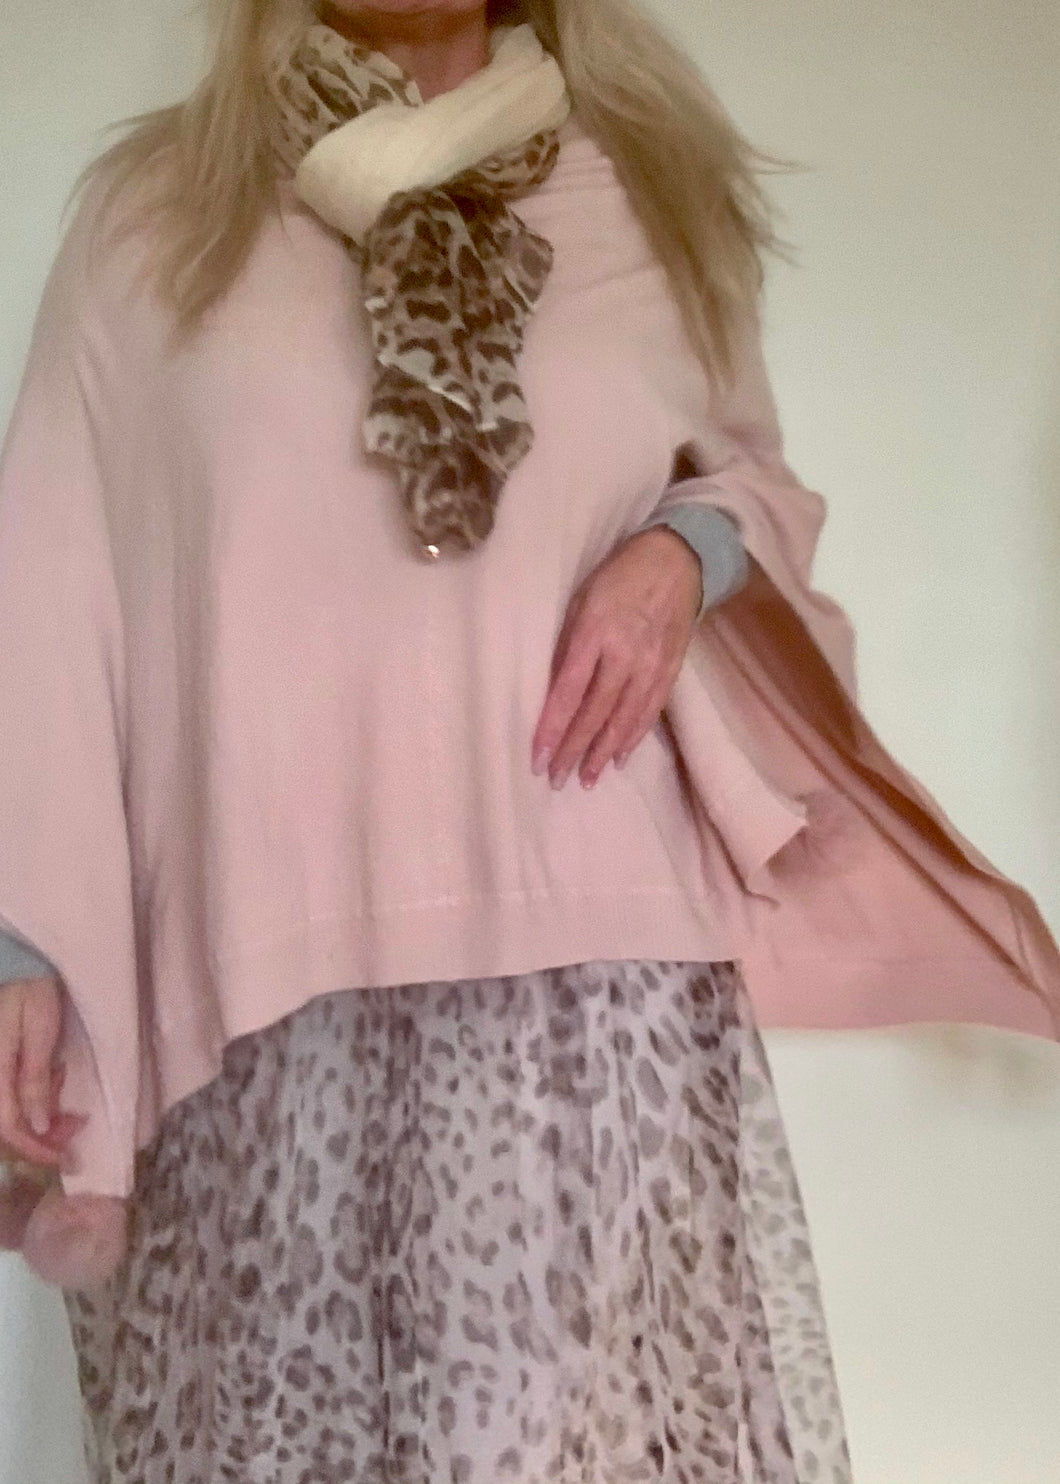 Mondial Poncho in Pink With Fur Pom Poms - Feathers Of Italy 